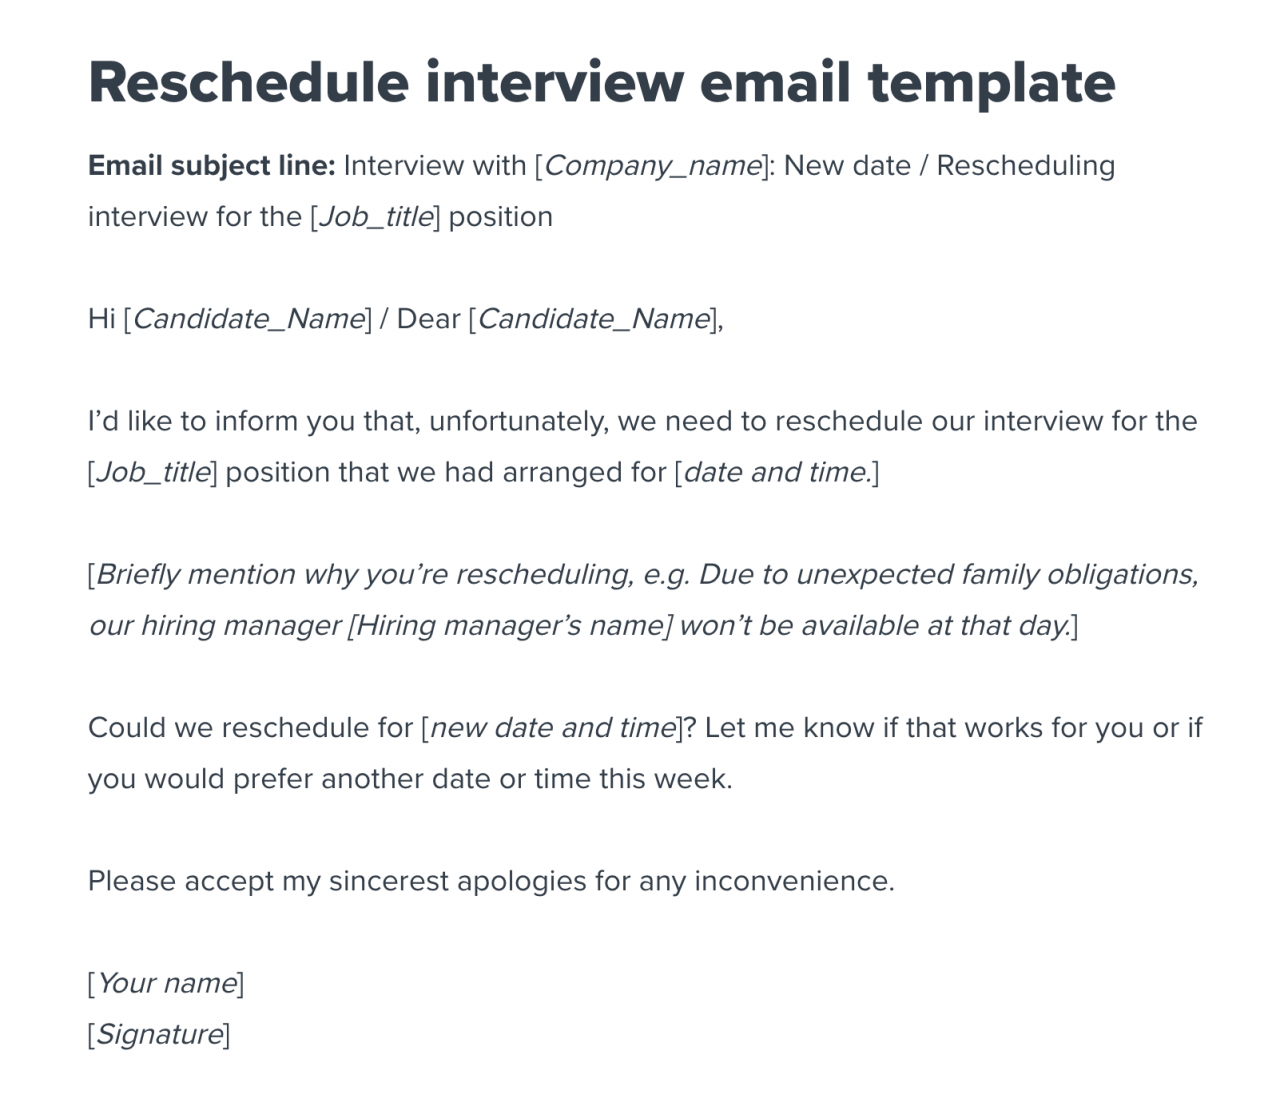 Excuse to reschedule an interview